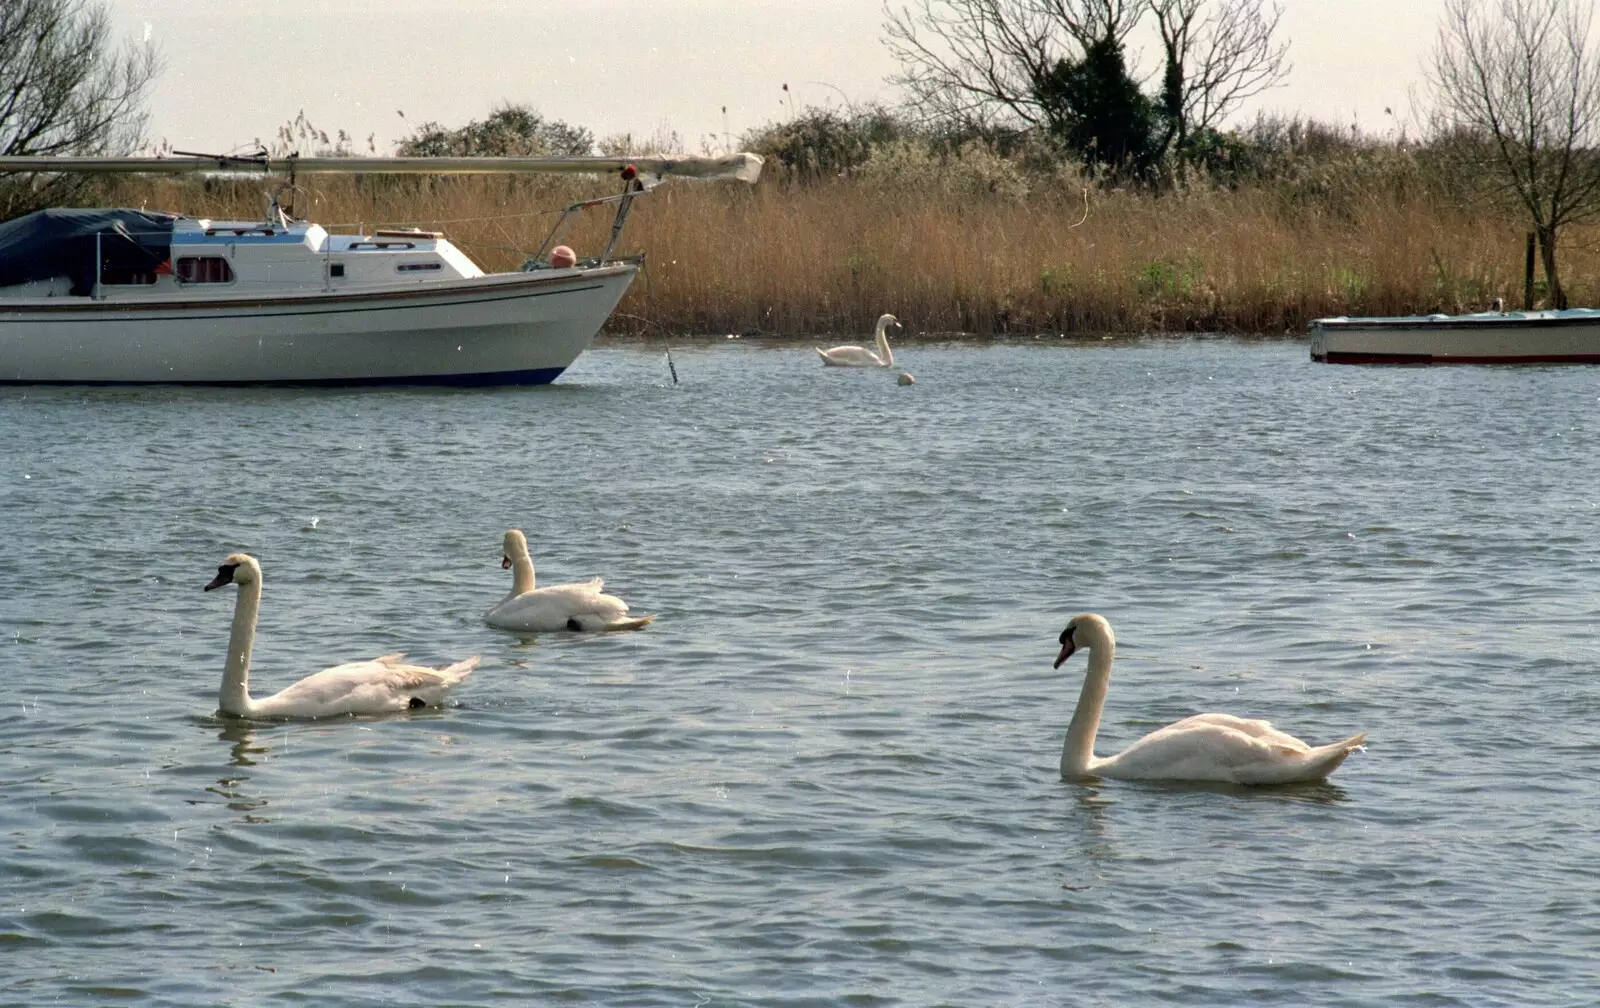 Swans on the River Stour, Christchurch, from The Vineyard, Christchurch and Pizza, New Milton and the New Forest - 2nd April 1989